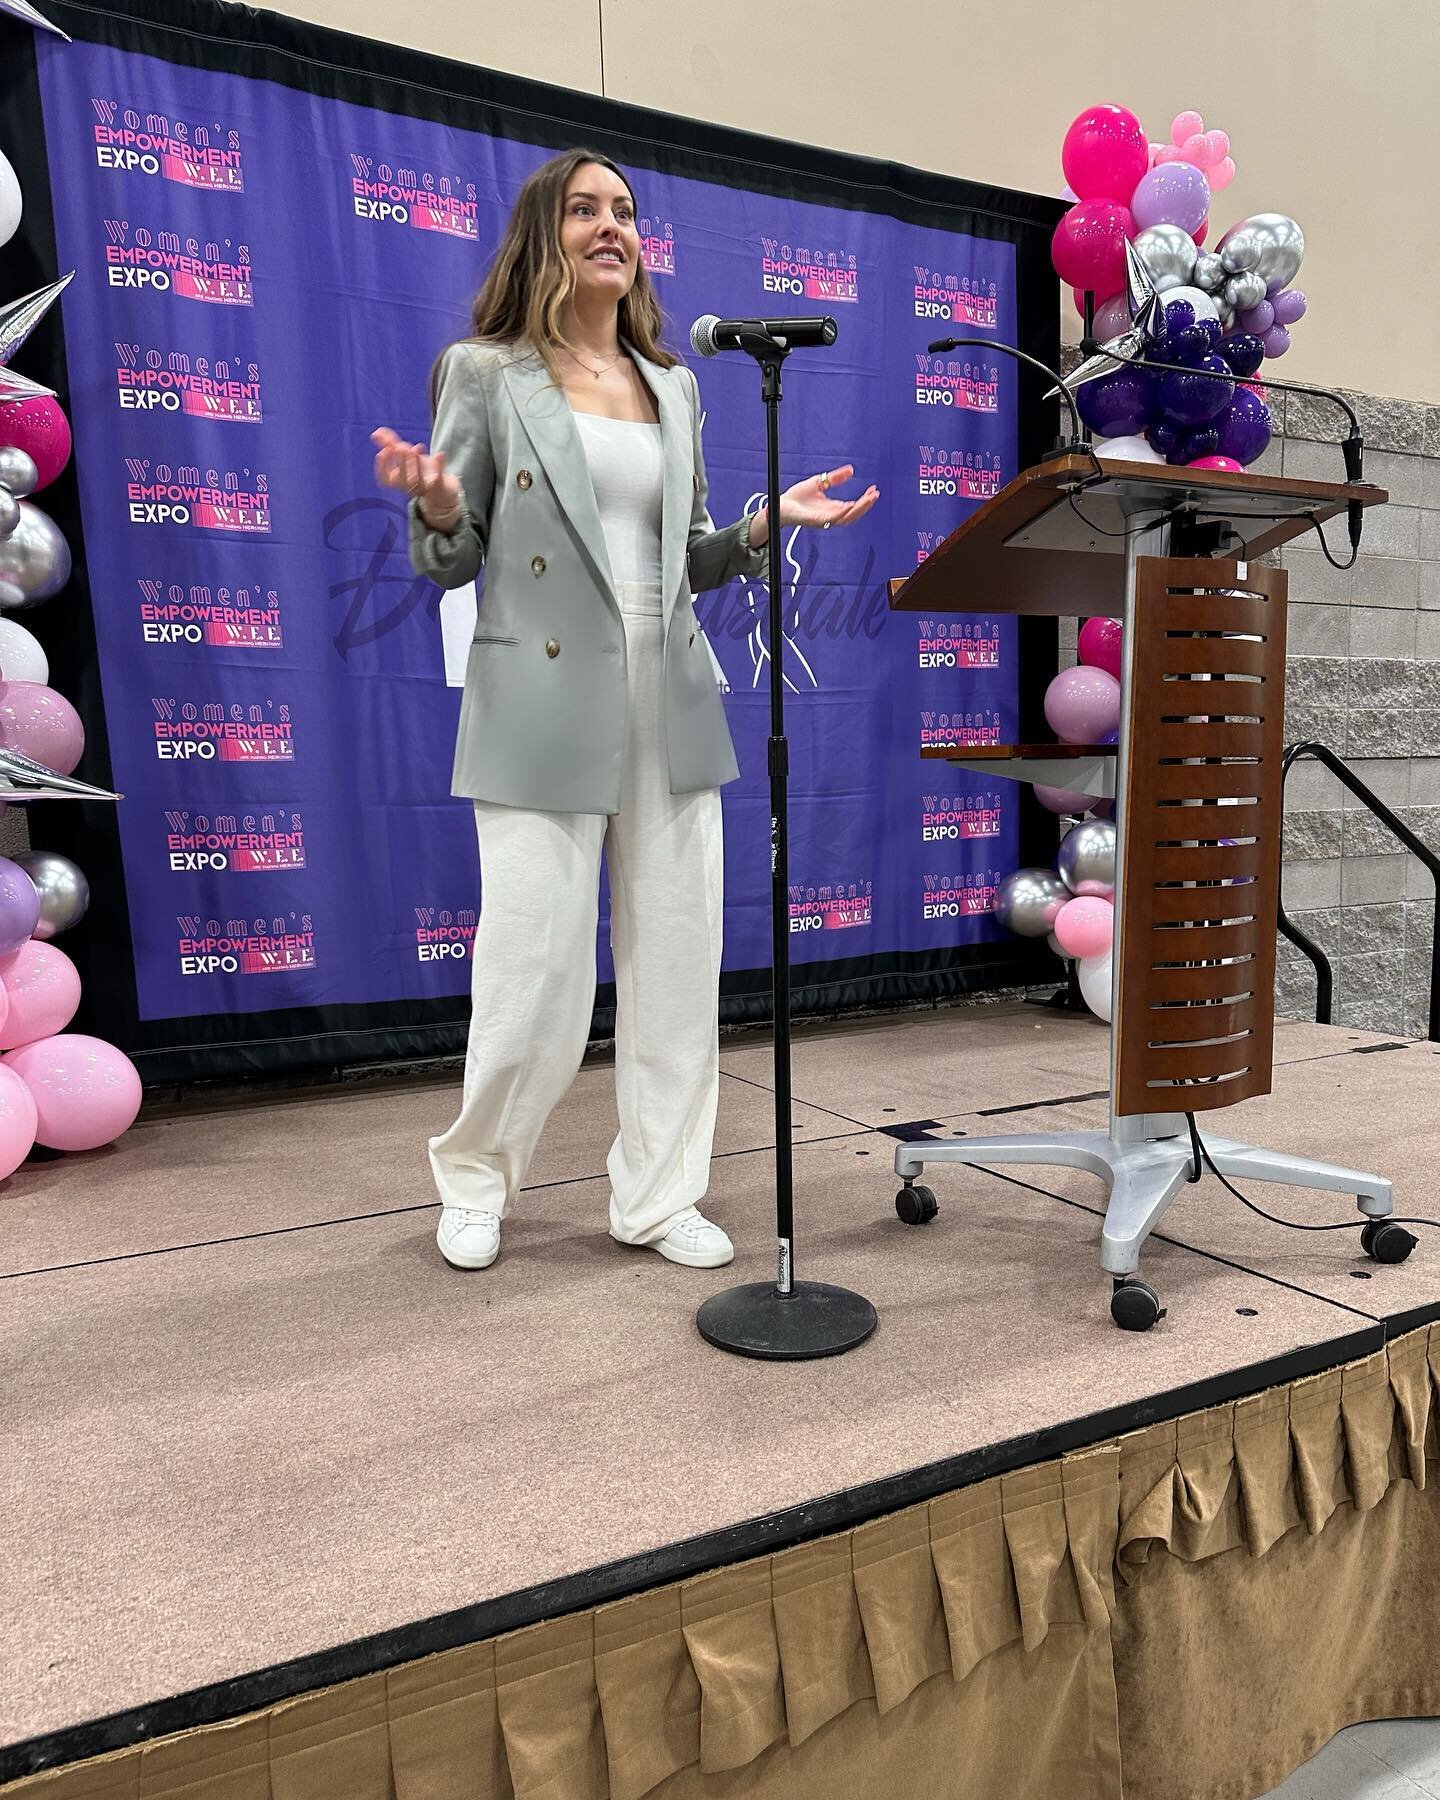 You know what&rsquo;s cool? 

CHASING YOUR DREAMS! 

It was a great privilege to be at the Women&rsquo;s Empowerment Expo as a leader in mental health. 

This feels like the convergence of my life experiences: 

💃🏽 Dancing growing up gave me the co